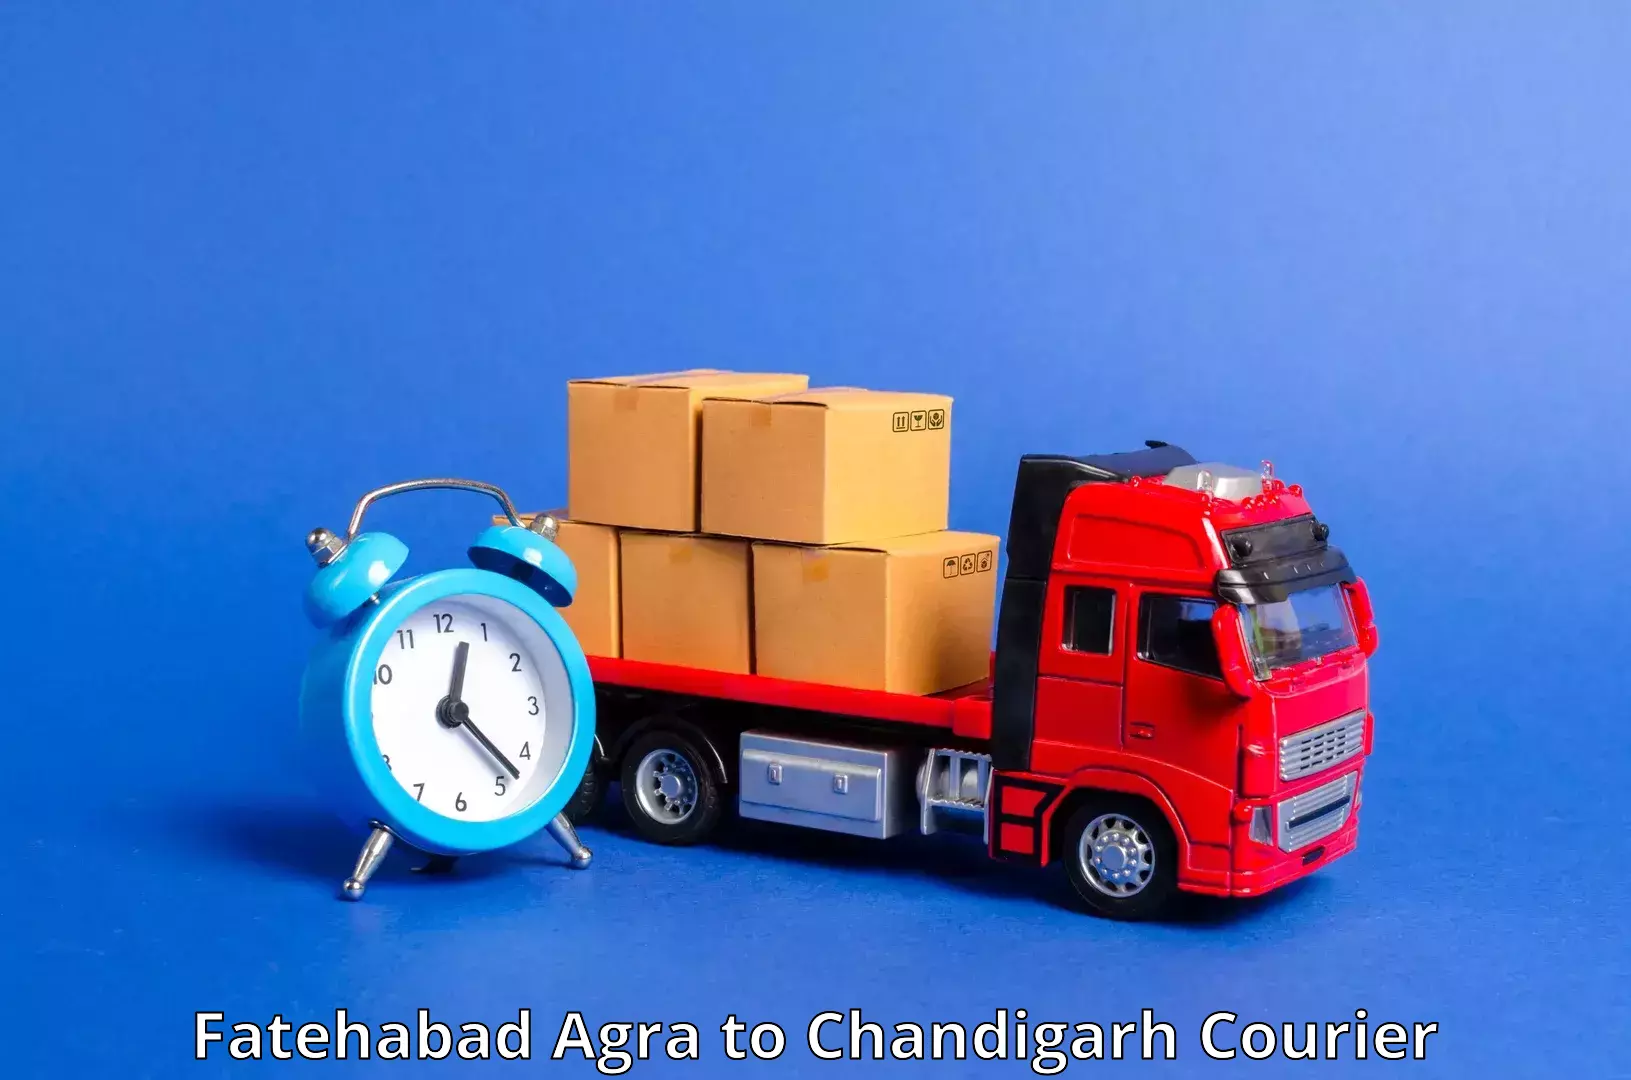 Comprehensive parcel tracking Fatehabad Agra to Chandigarh